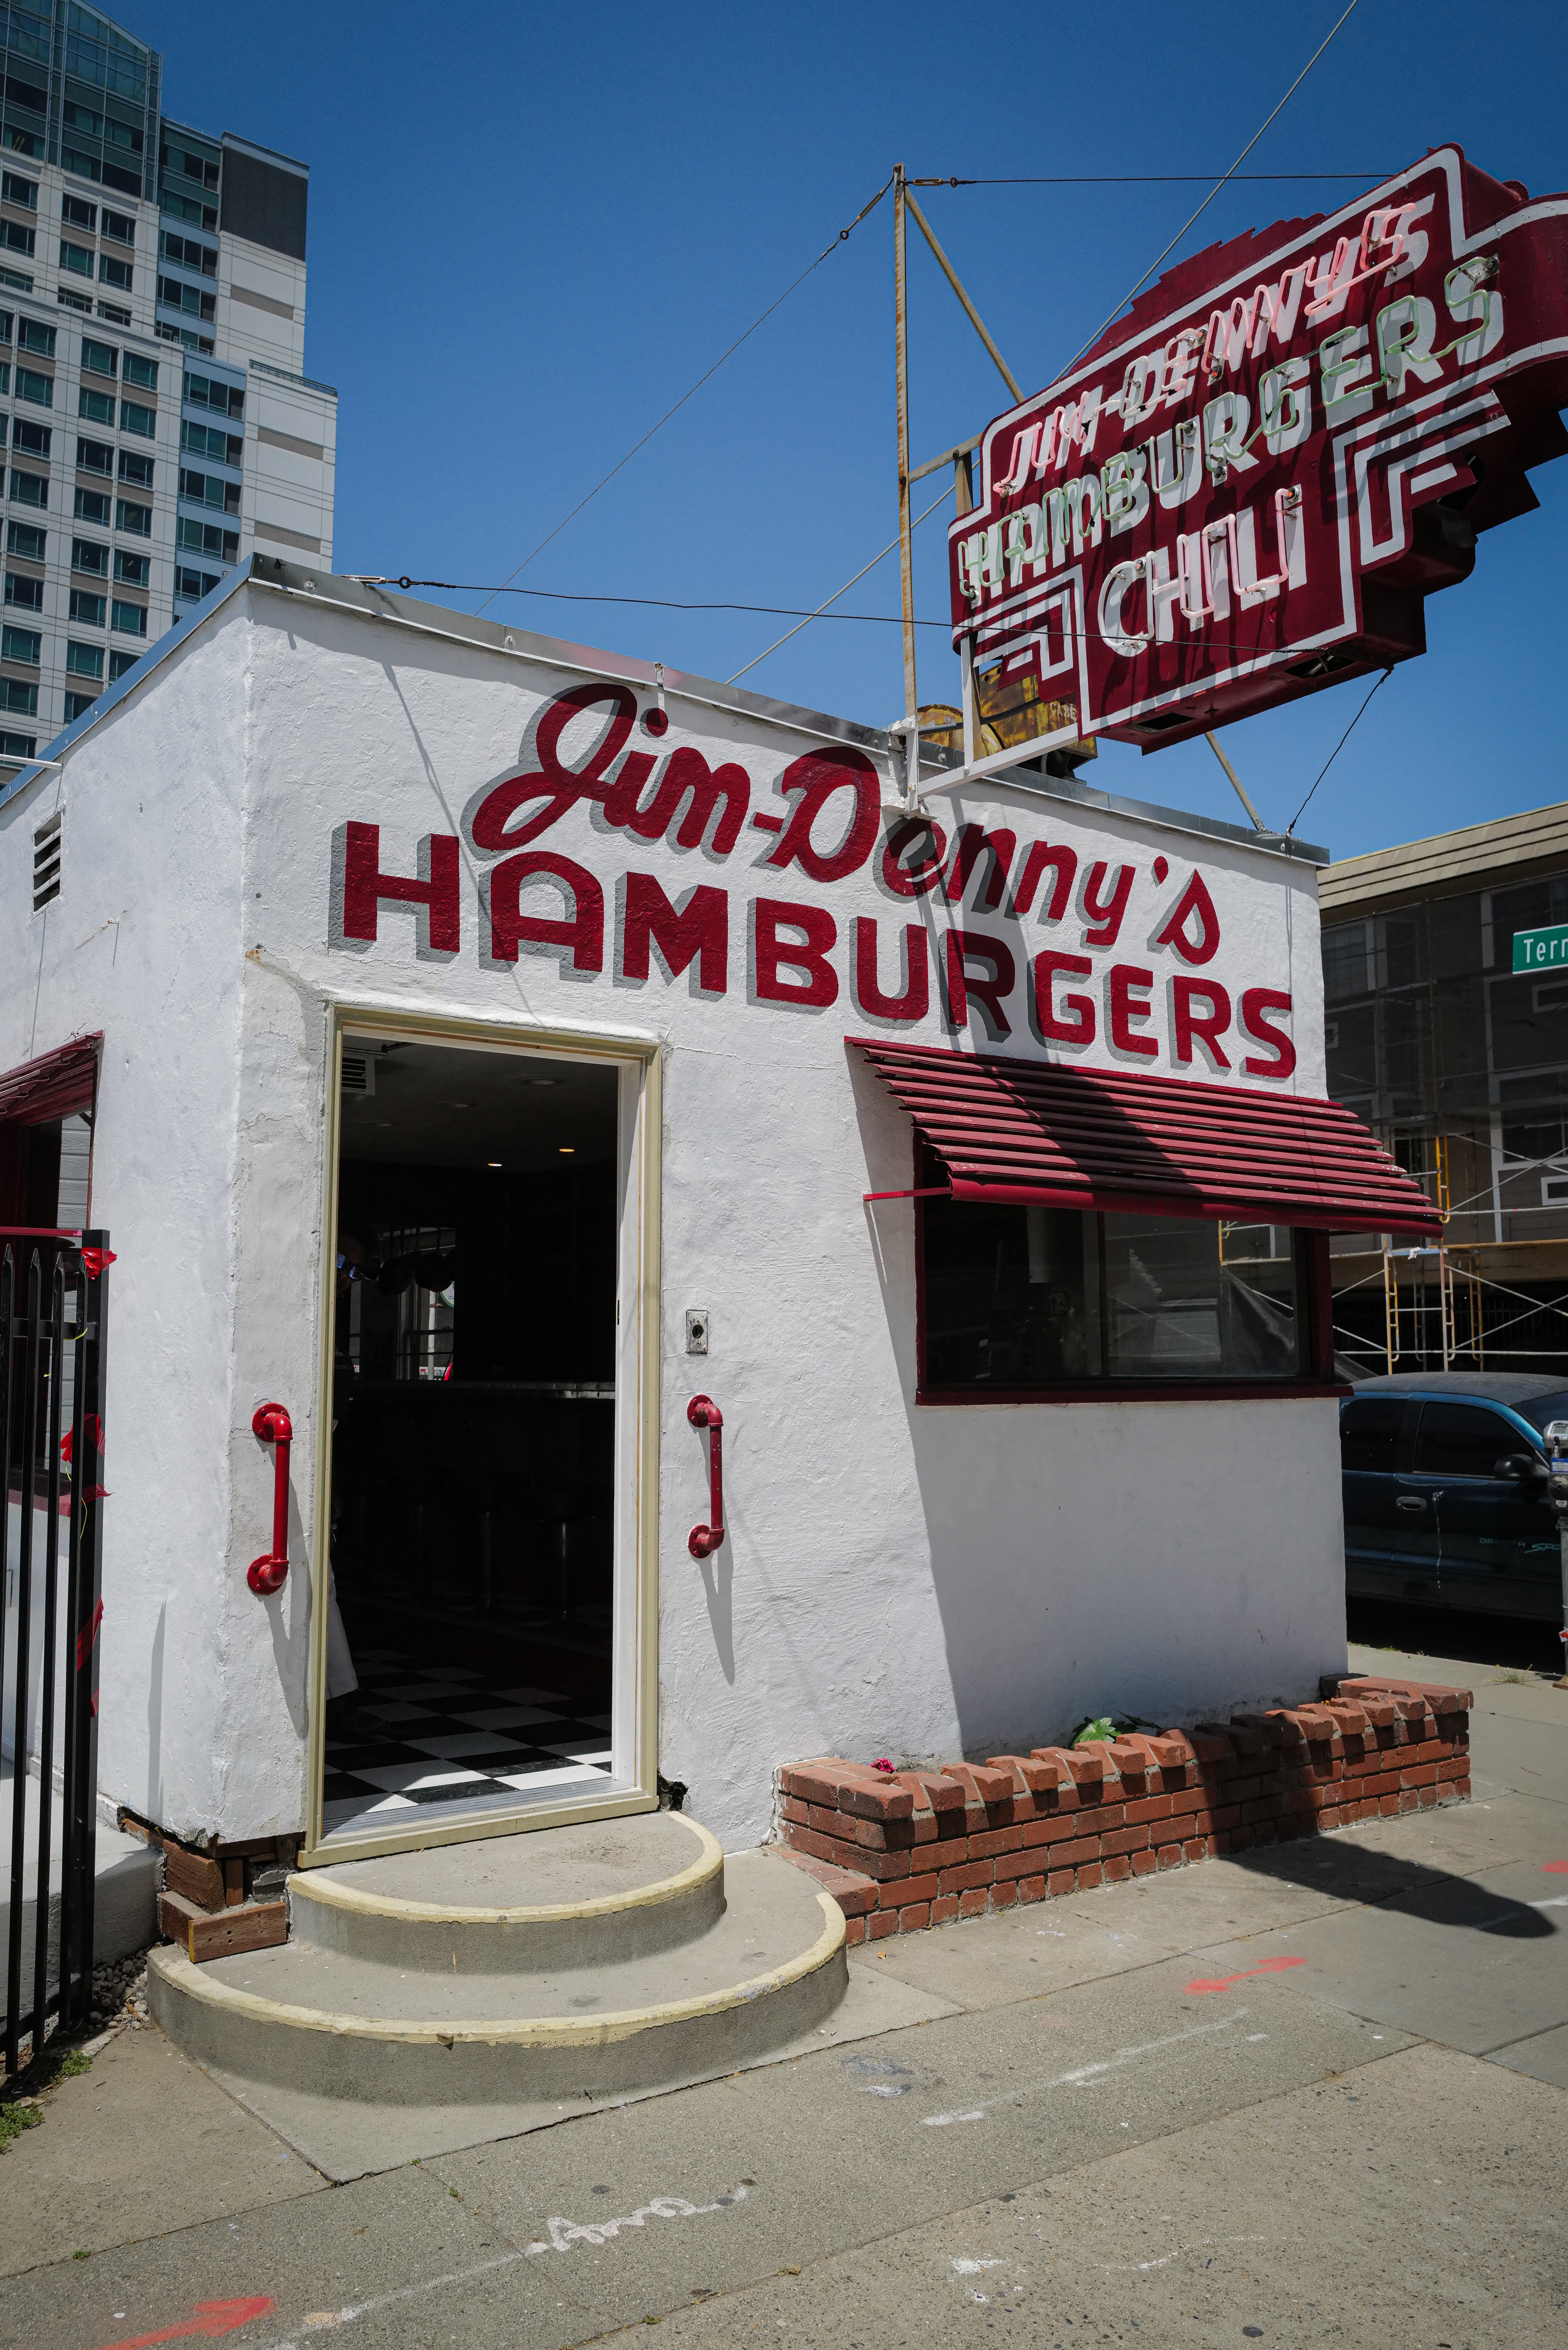 The exterior of a red and white building with a sign that reads Jim Denny’s.